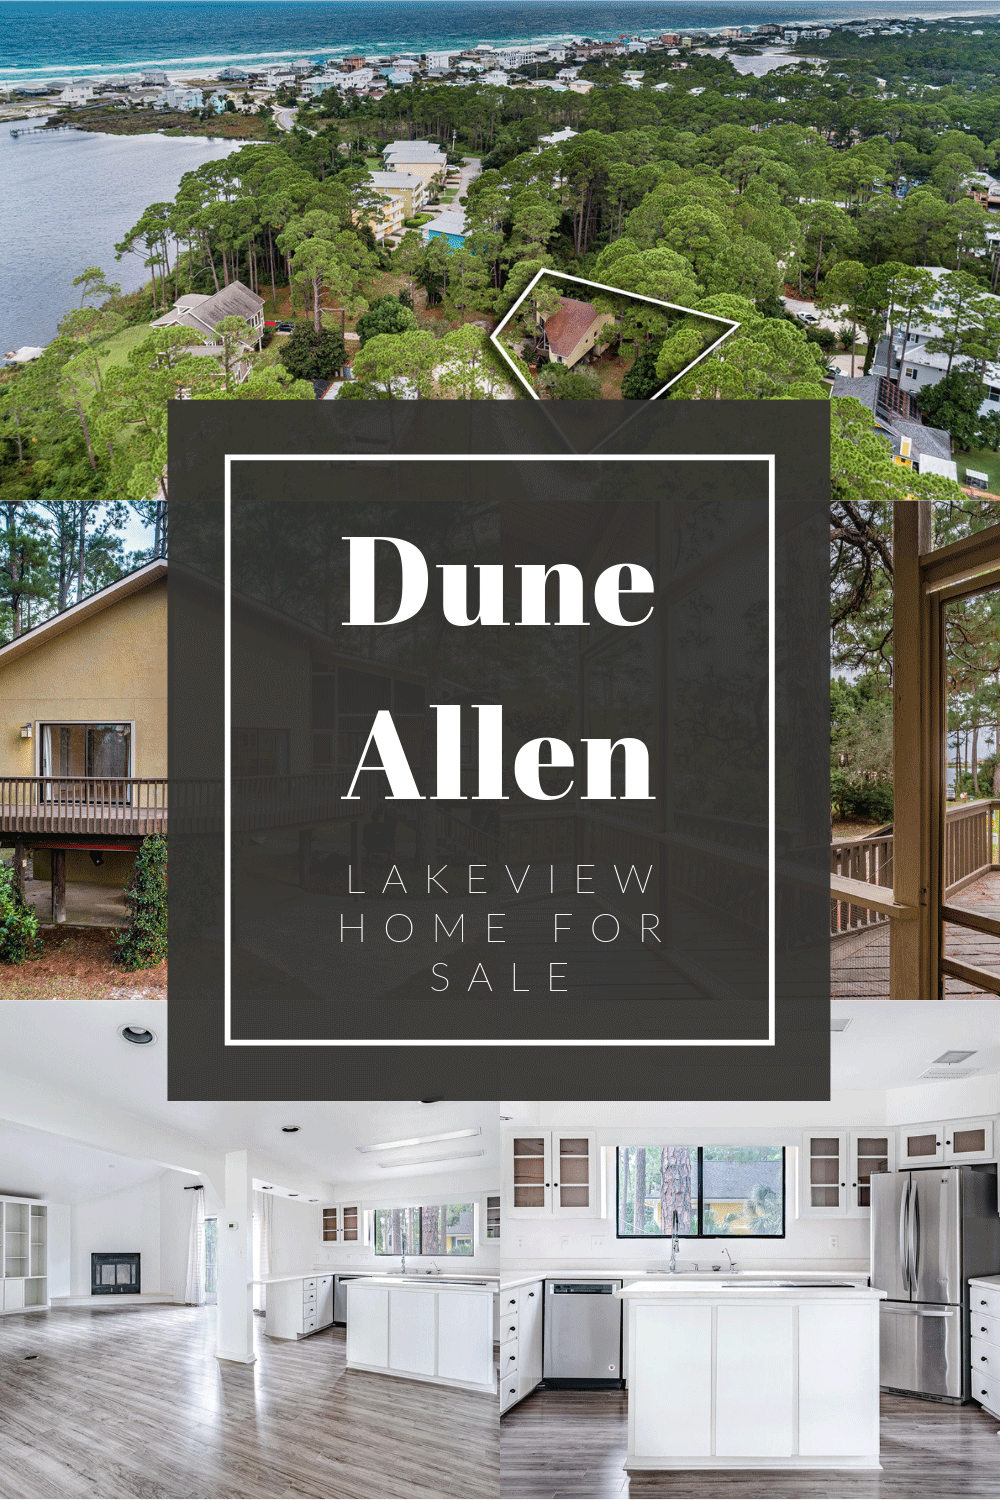 Dune Allen Lakeview Home for Sale